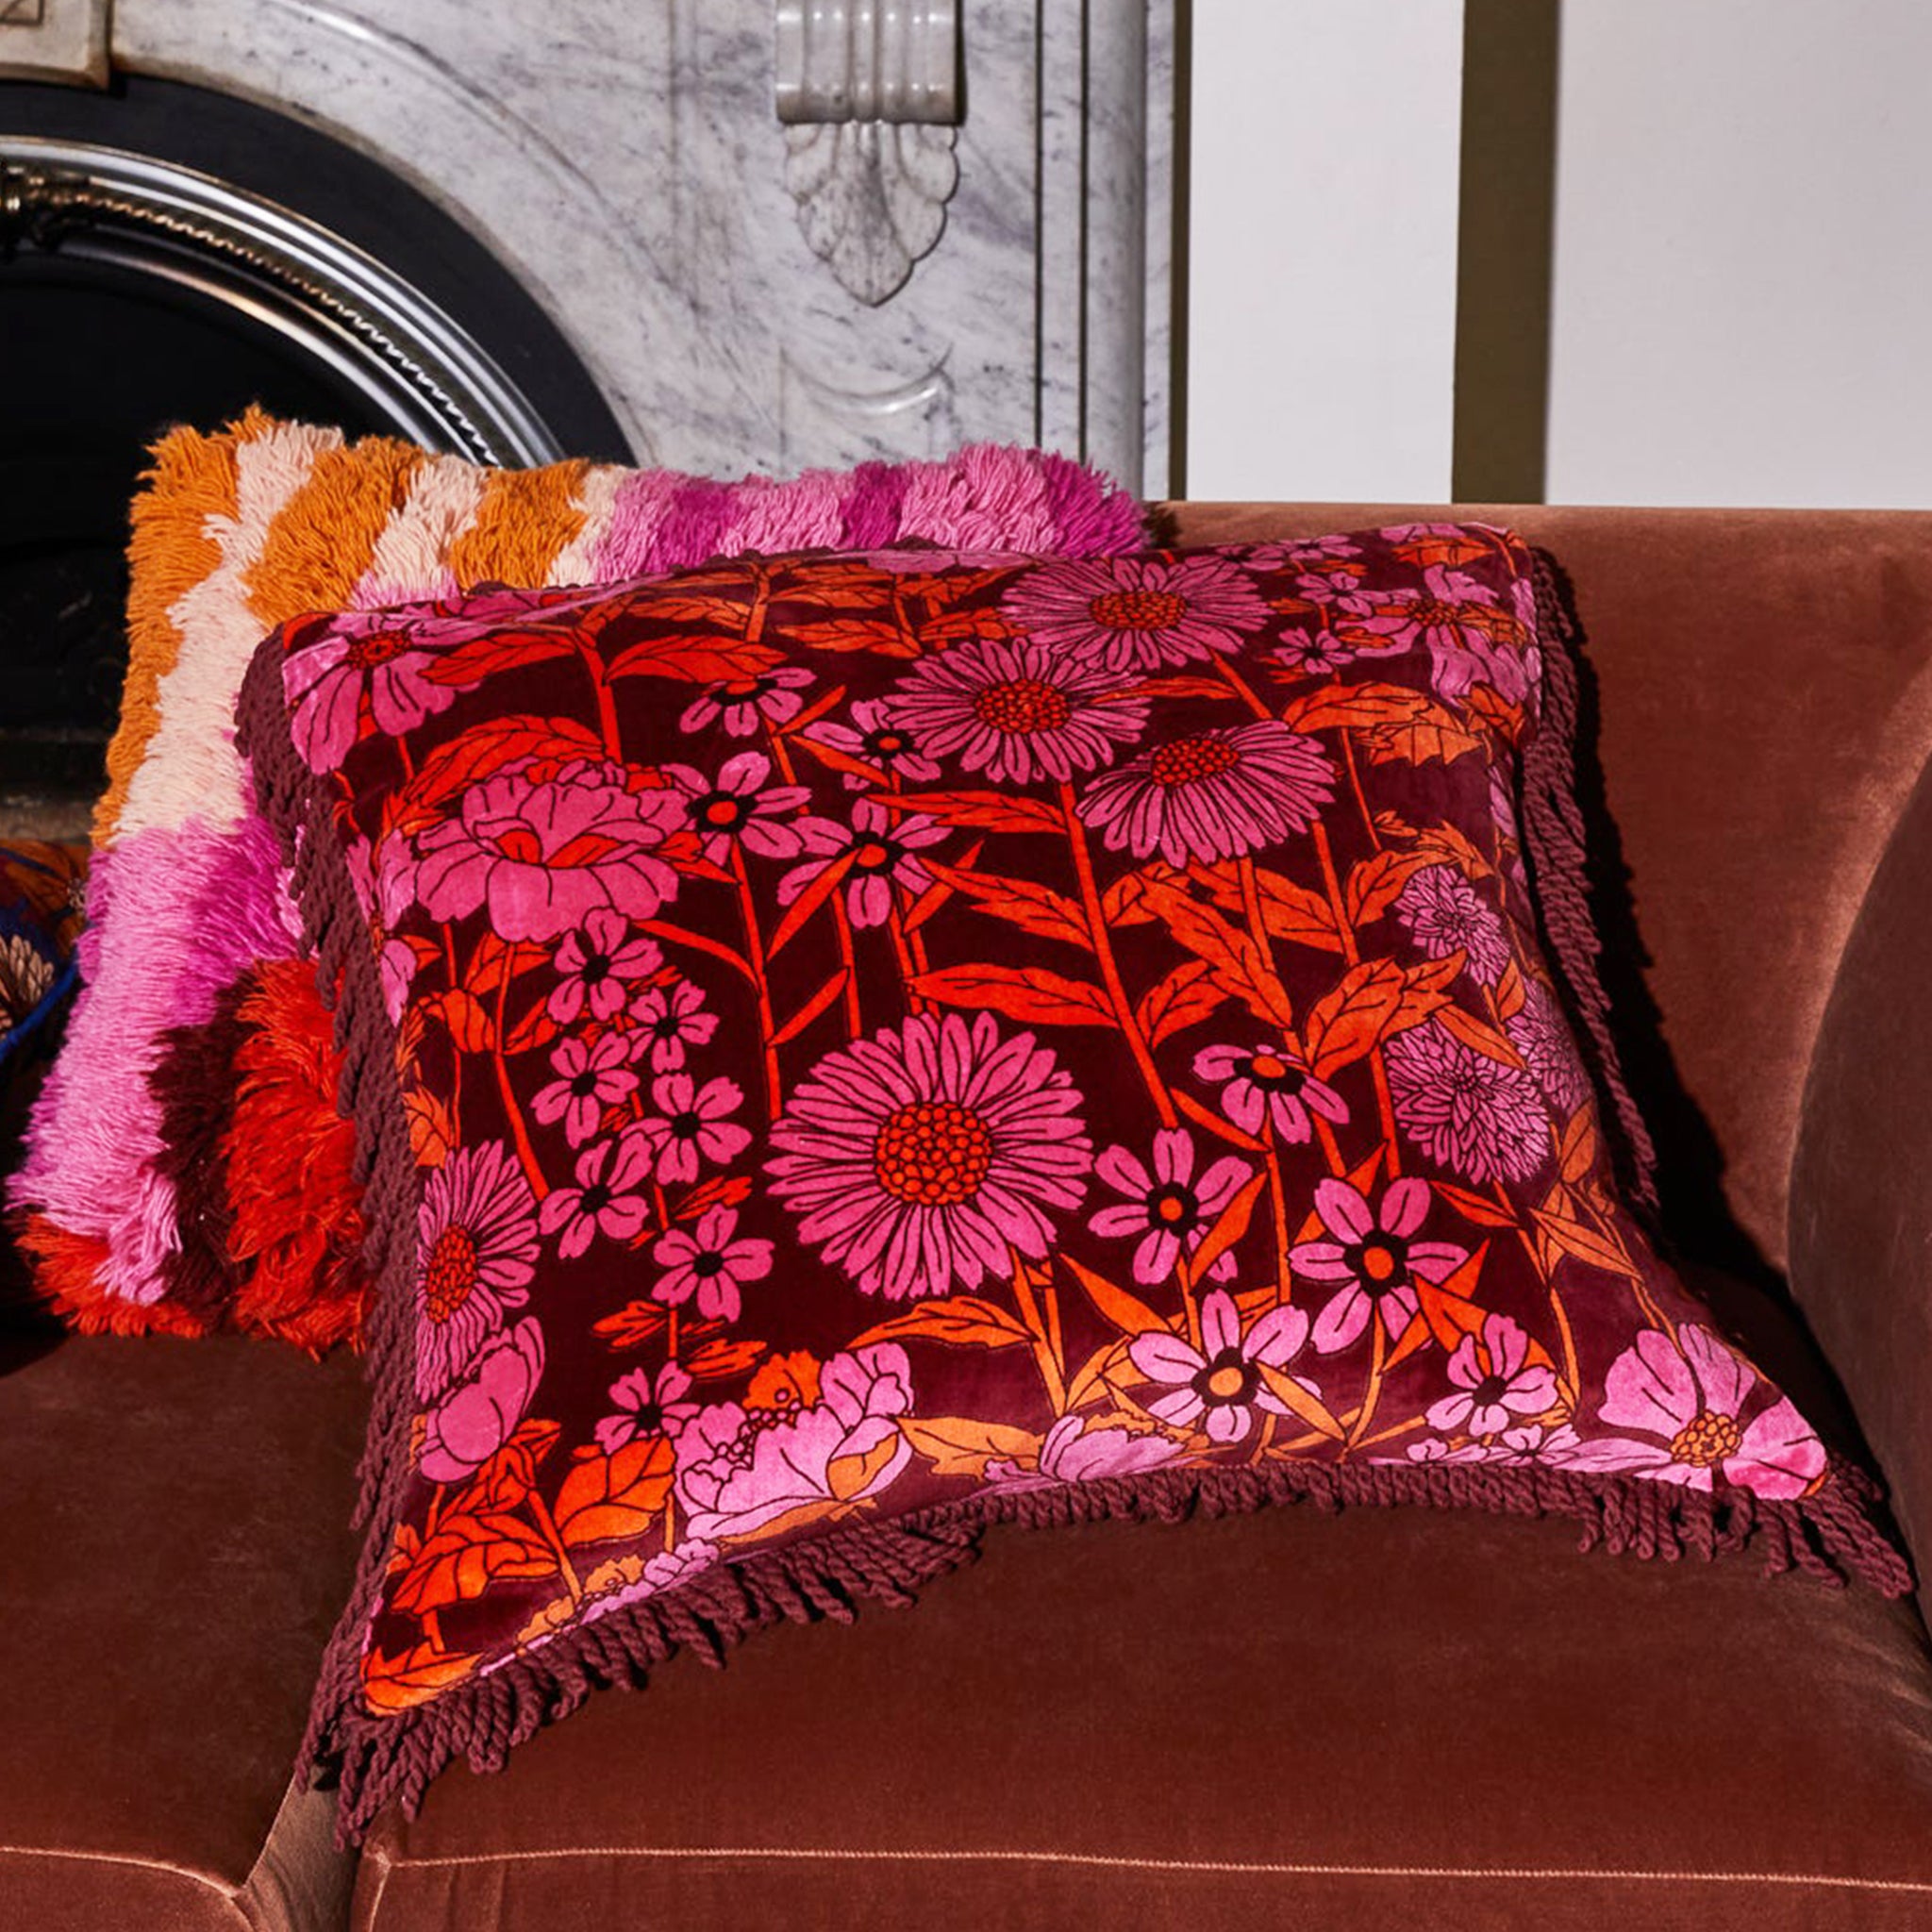 A pink and orange floral printed pillow with a fringe detail.